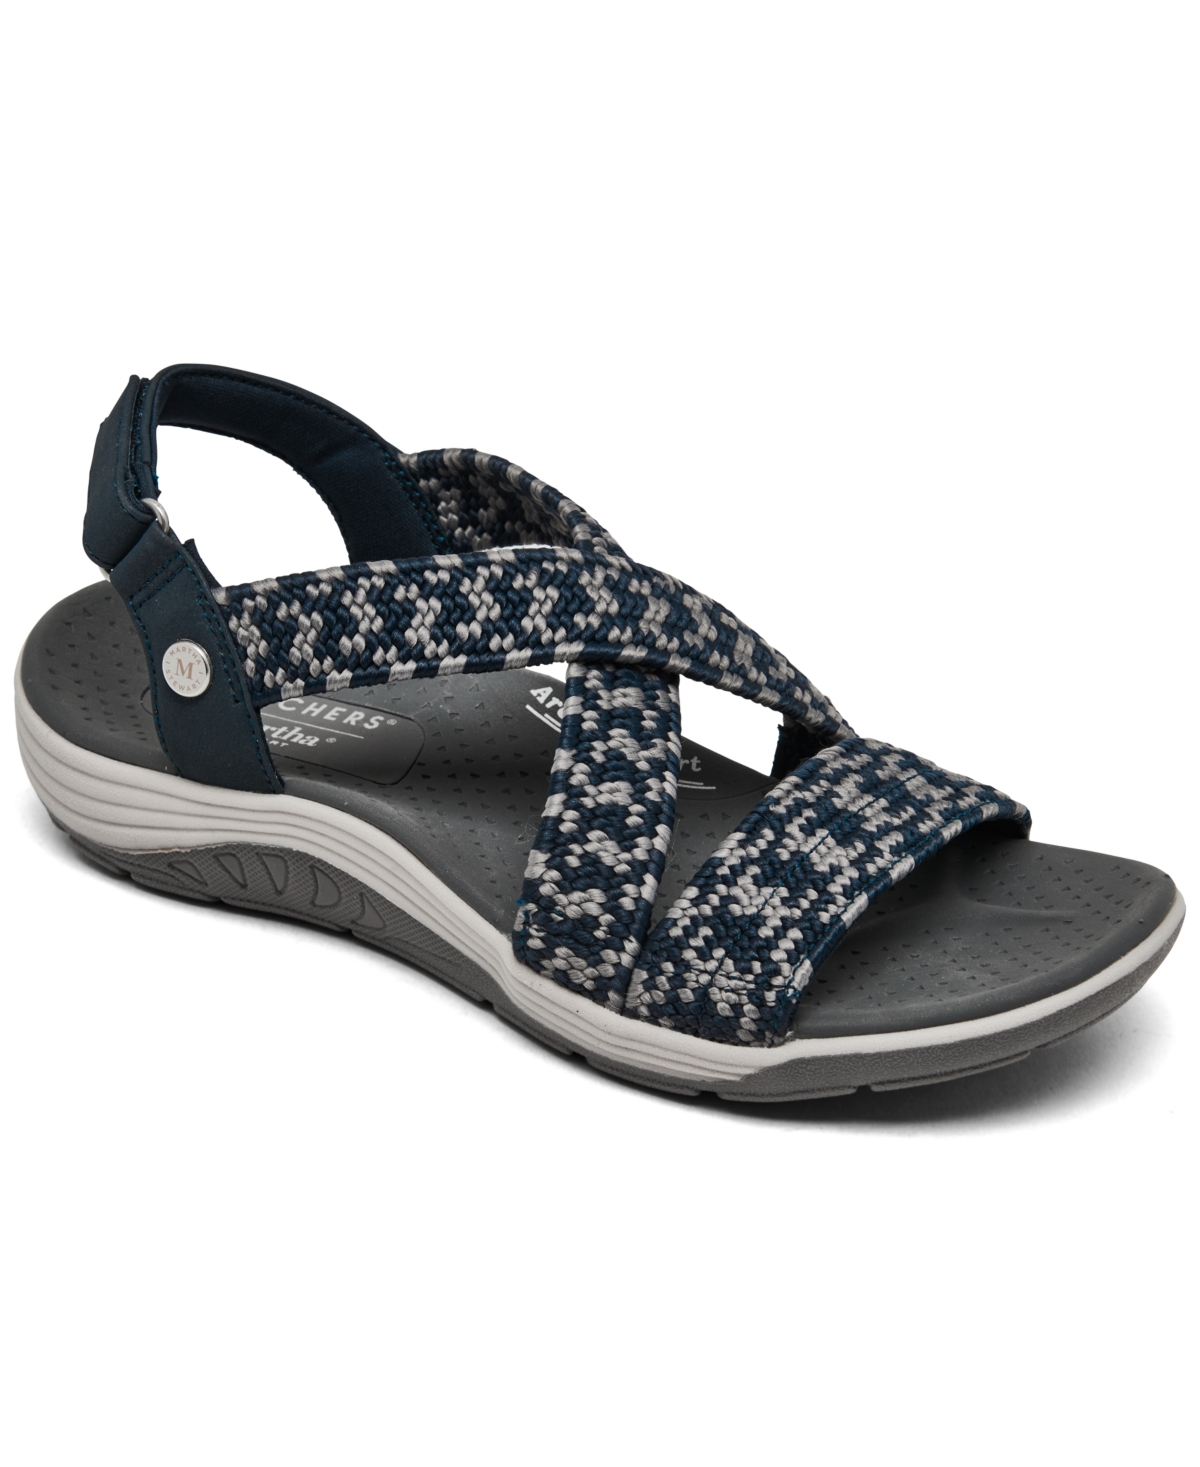 Women's Martha Stewart Reggae Cup - Coastal Trails Athletic Sandals from Finish Line - Taupe, Natural